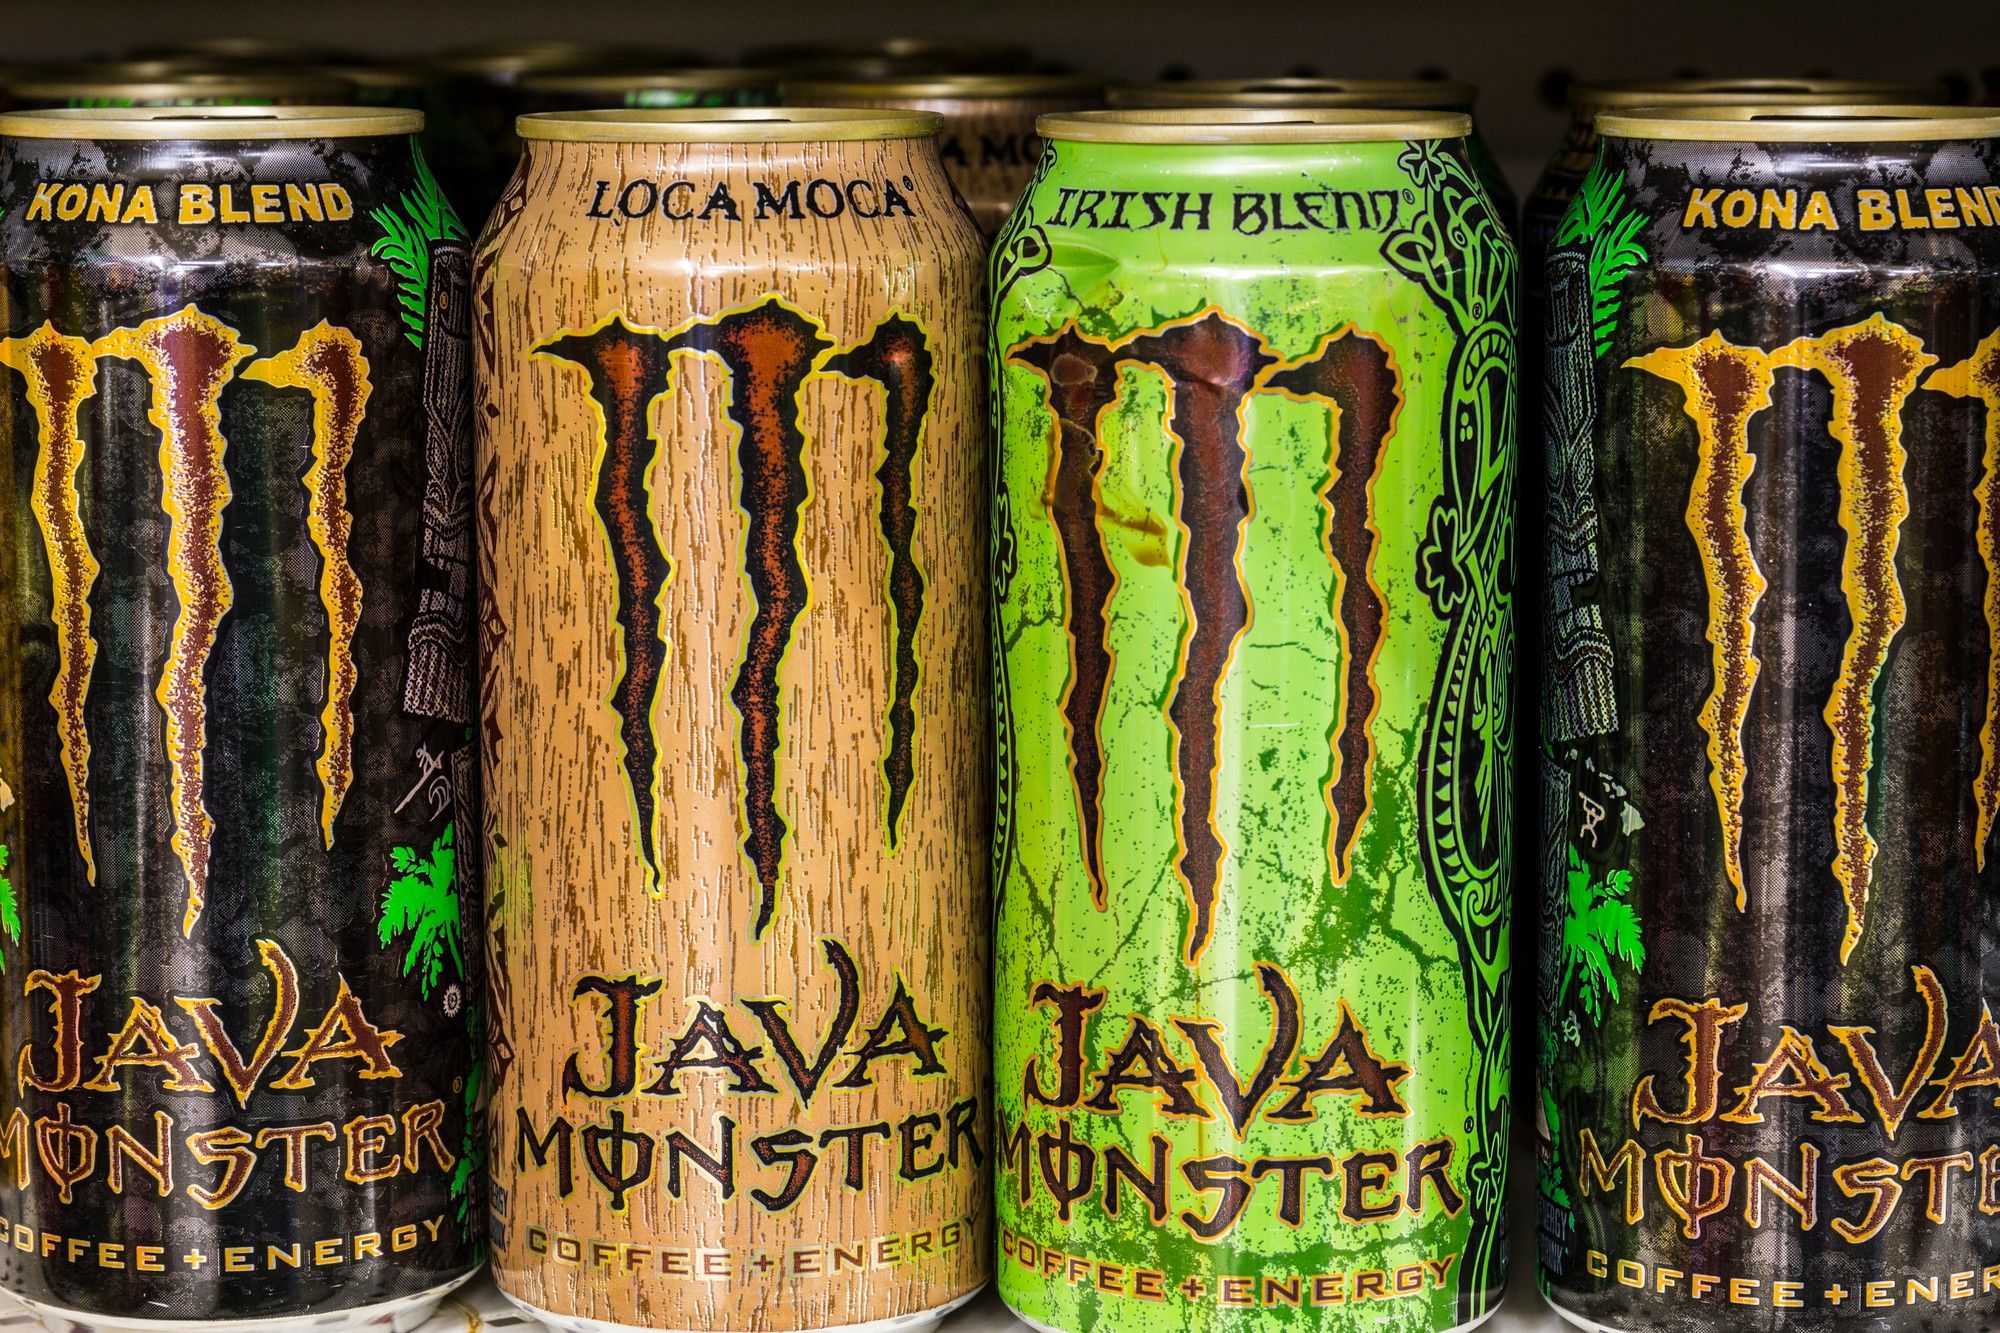 Monster energy drink doesn't contain vanilla bean.